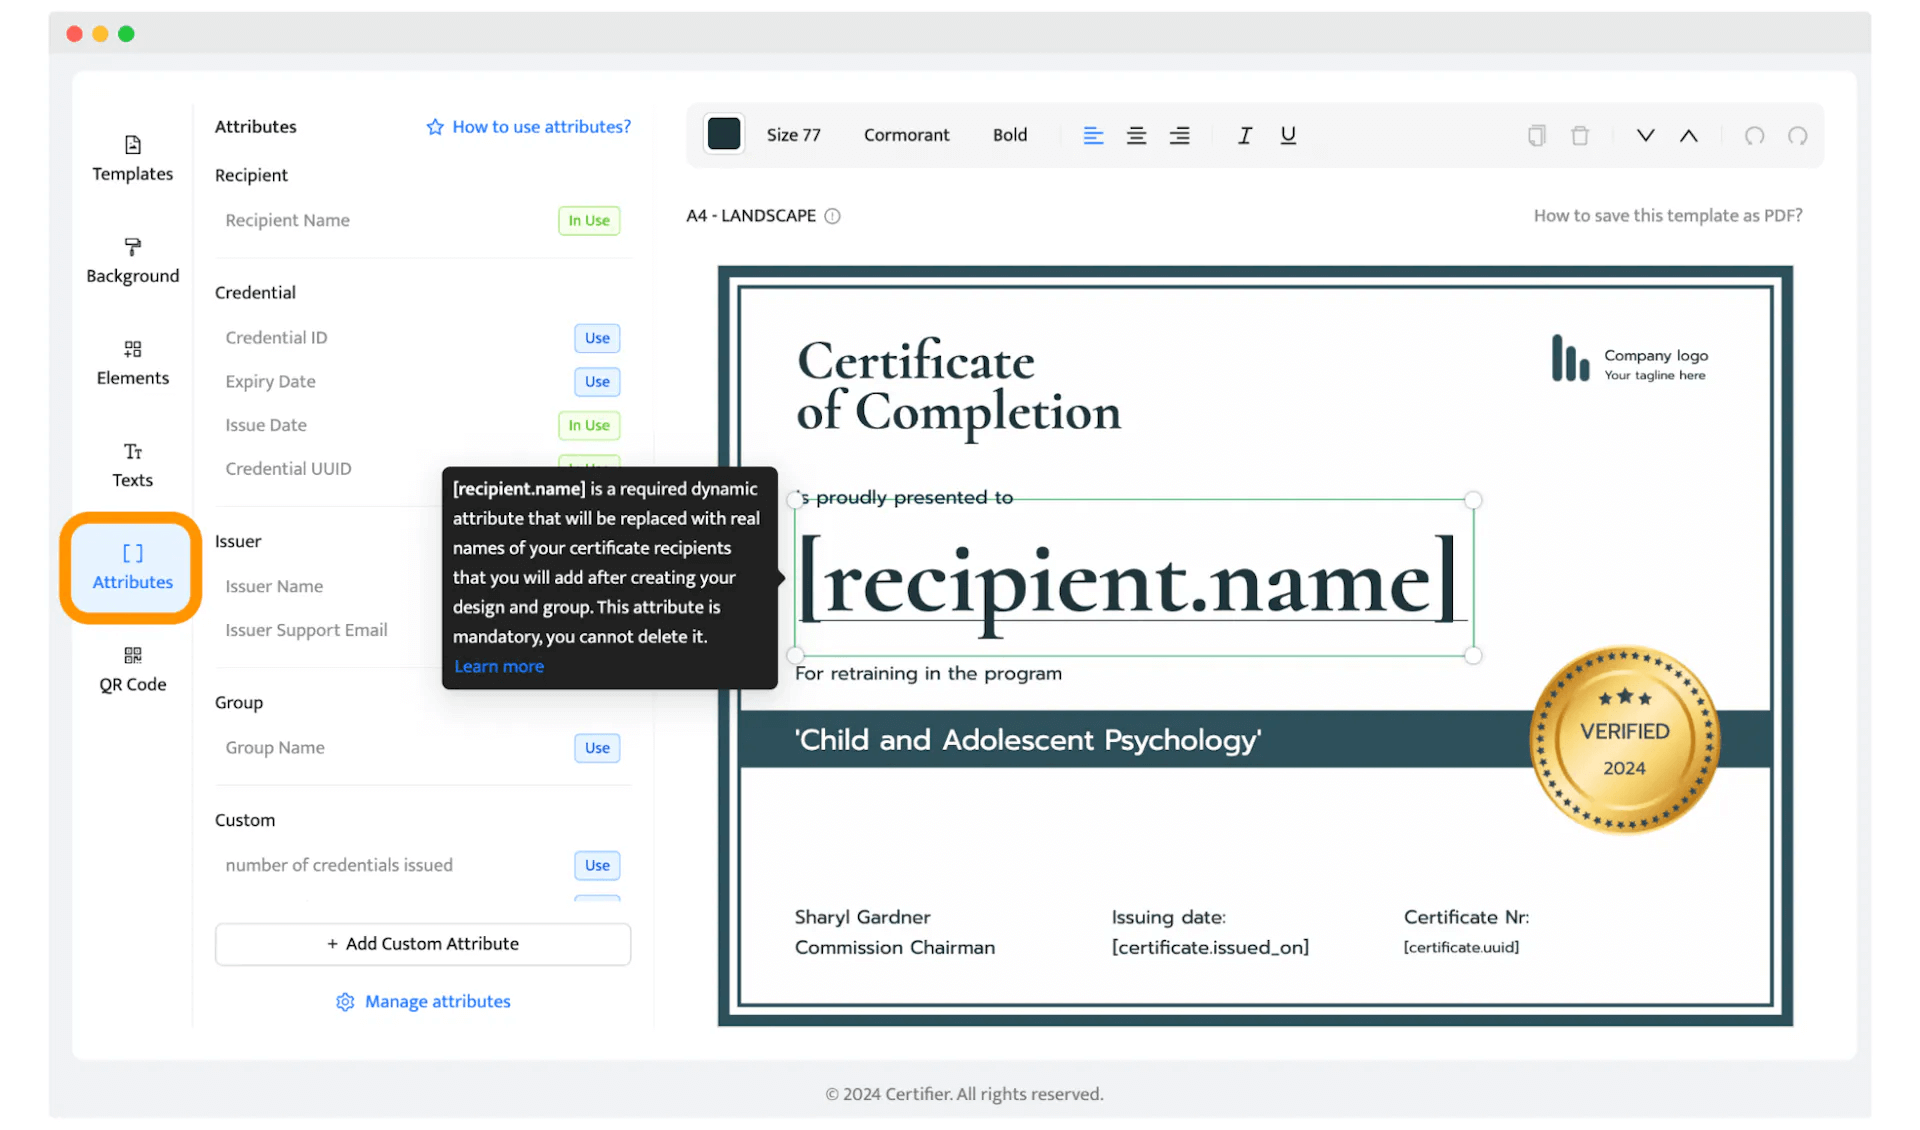 A certificate with dynamic attributes for better personalization.